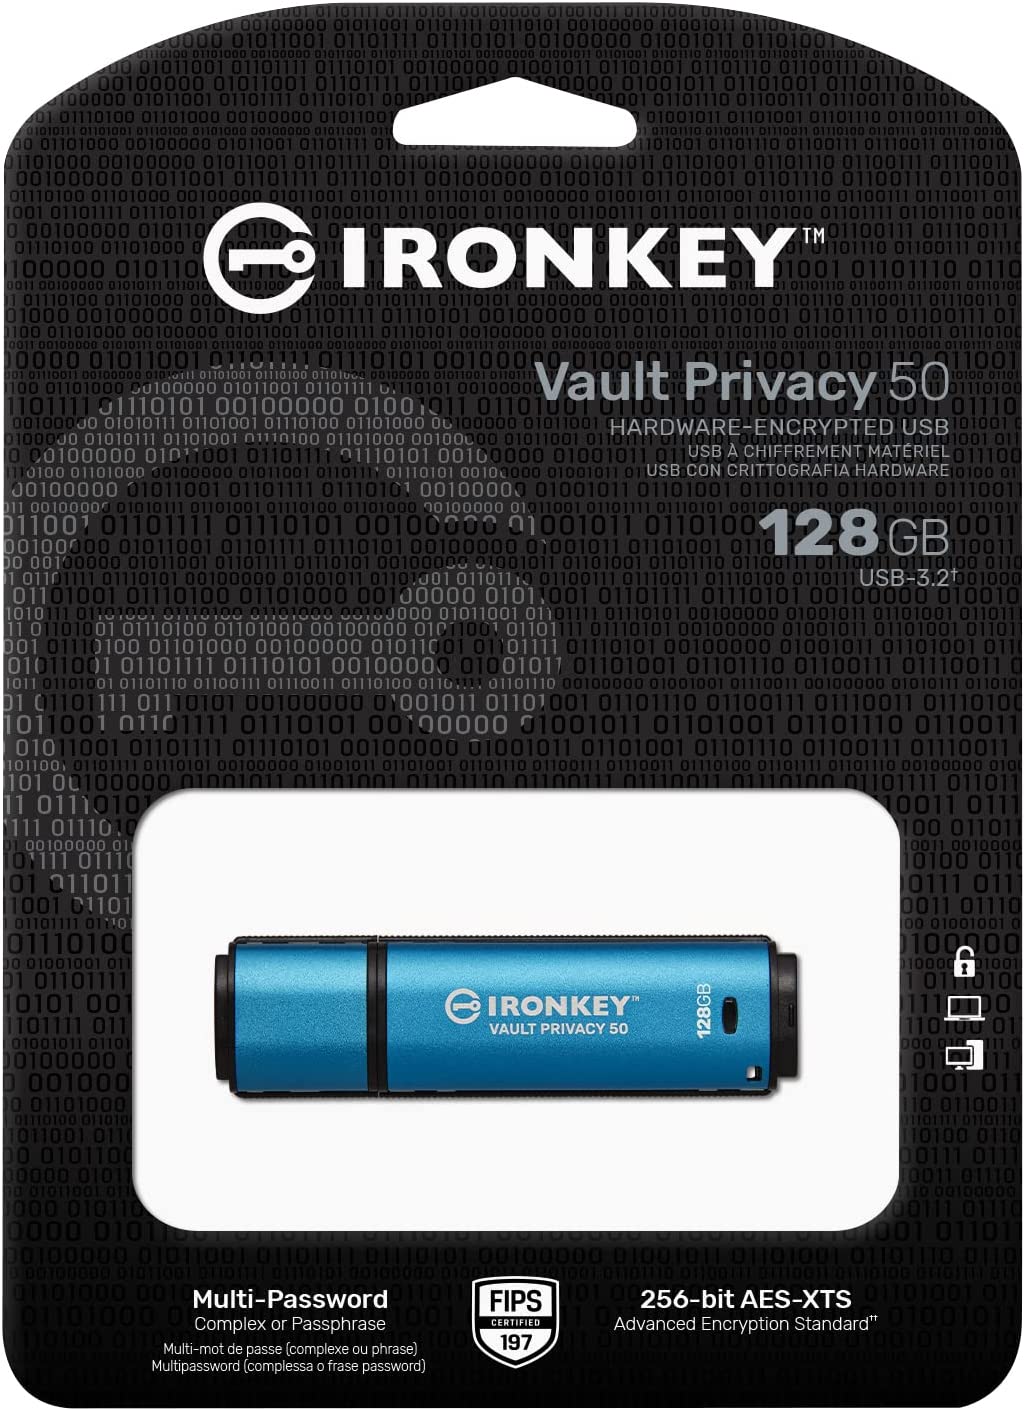 Kingston IronKey Vault Privacy 50 128GB Encrypted USB | FIPS 197 | AES-256bit | BadUSB Attack Protection | Multi-Password Options | IKVP50/128GB